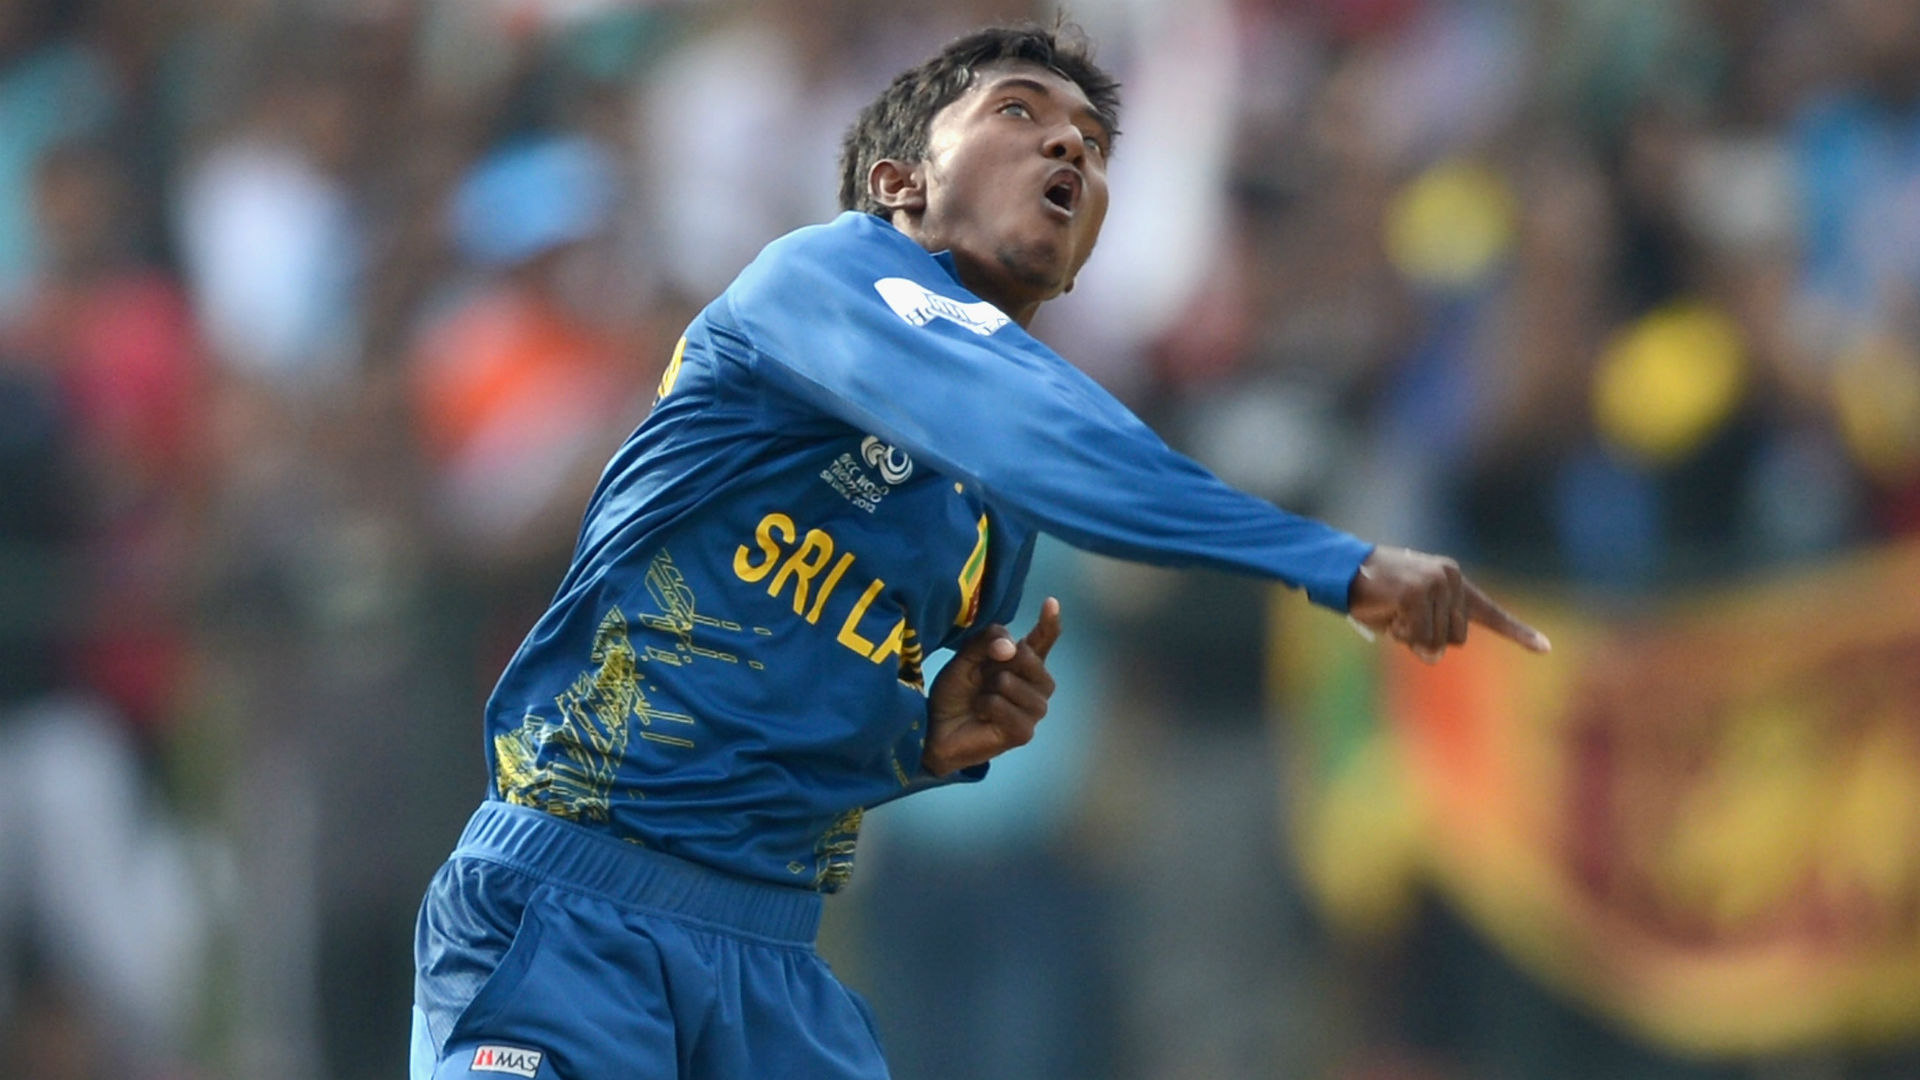 Banned from bowling by the ICC in December, Akila Dananjaya has been included in Sri Lanka's squad to face South Africa in five ODIs.